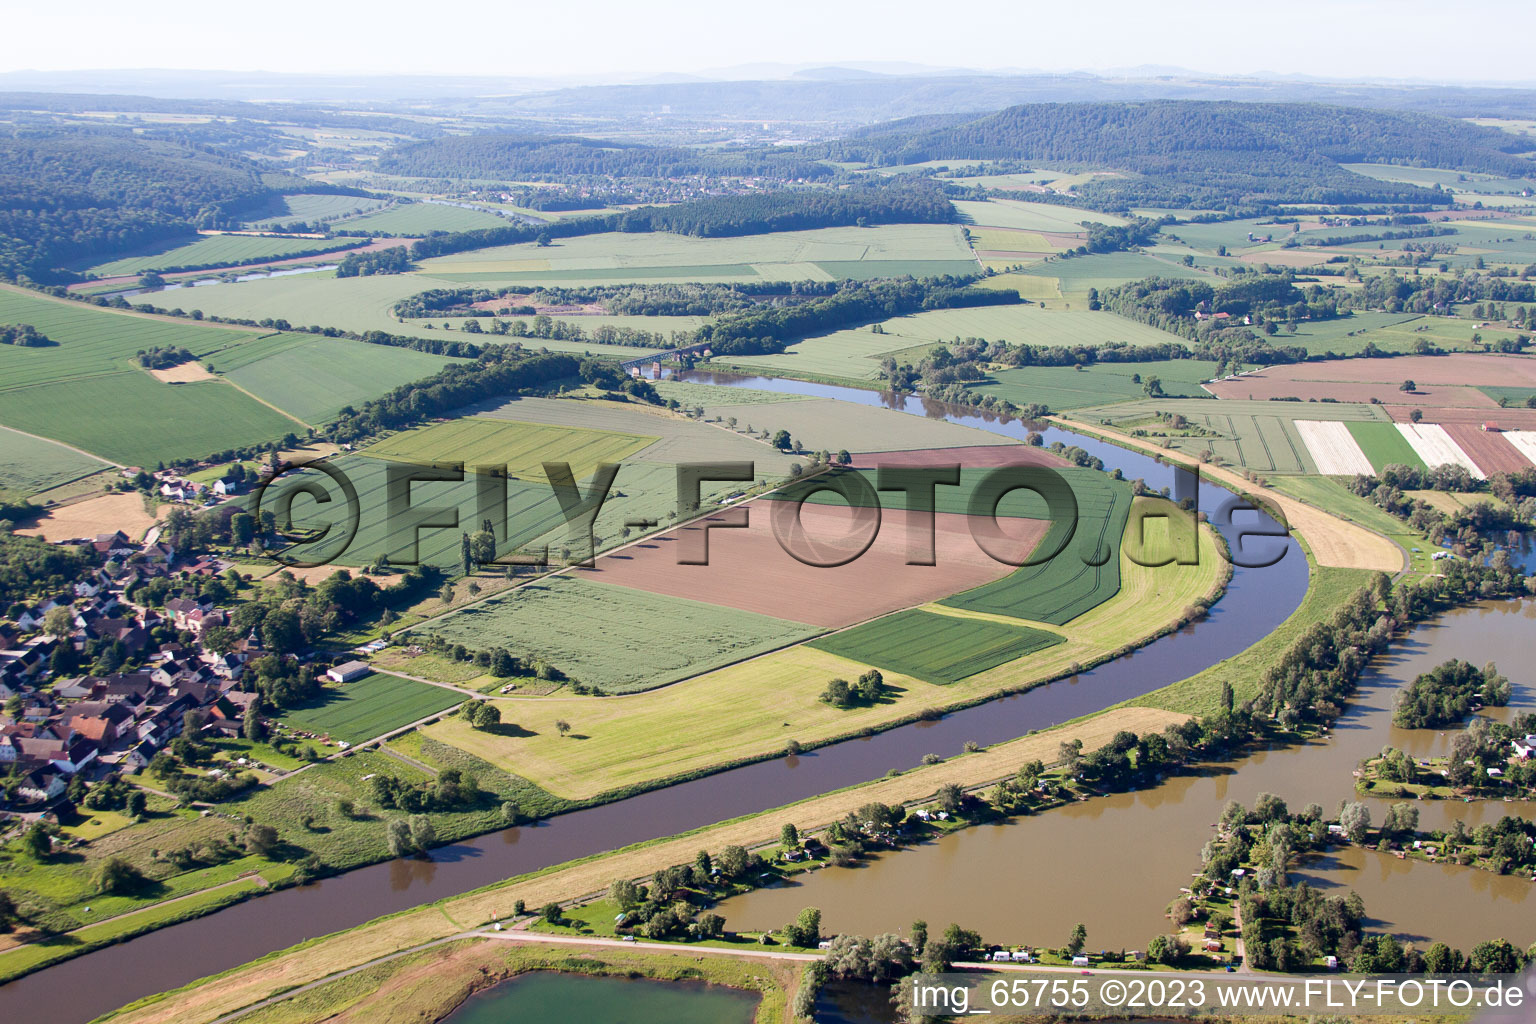 Oblique view of Boffzen in the state North Rhine-Westphalia, Germany